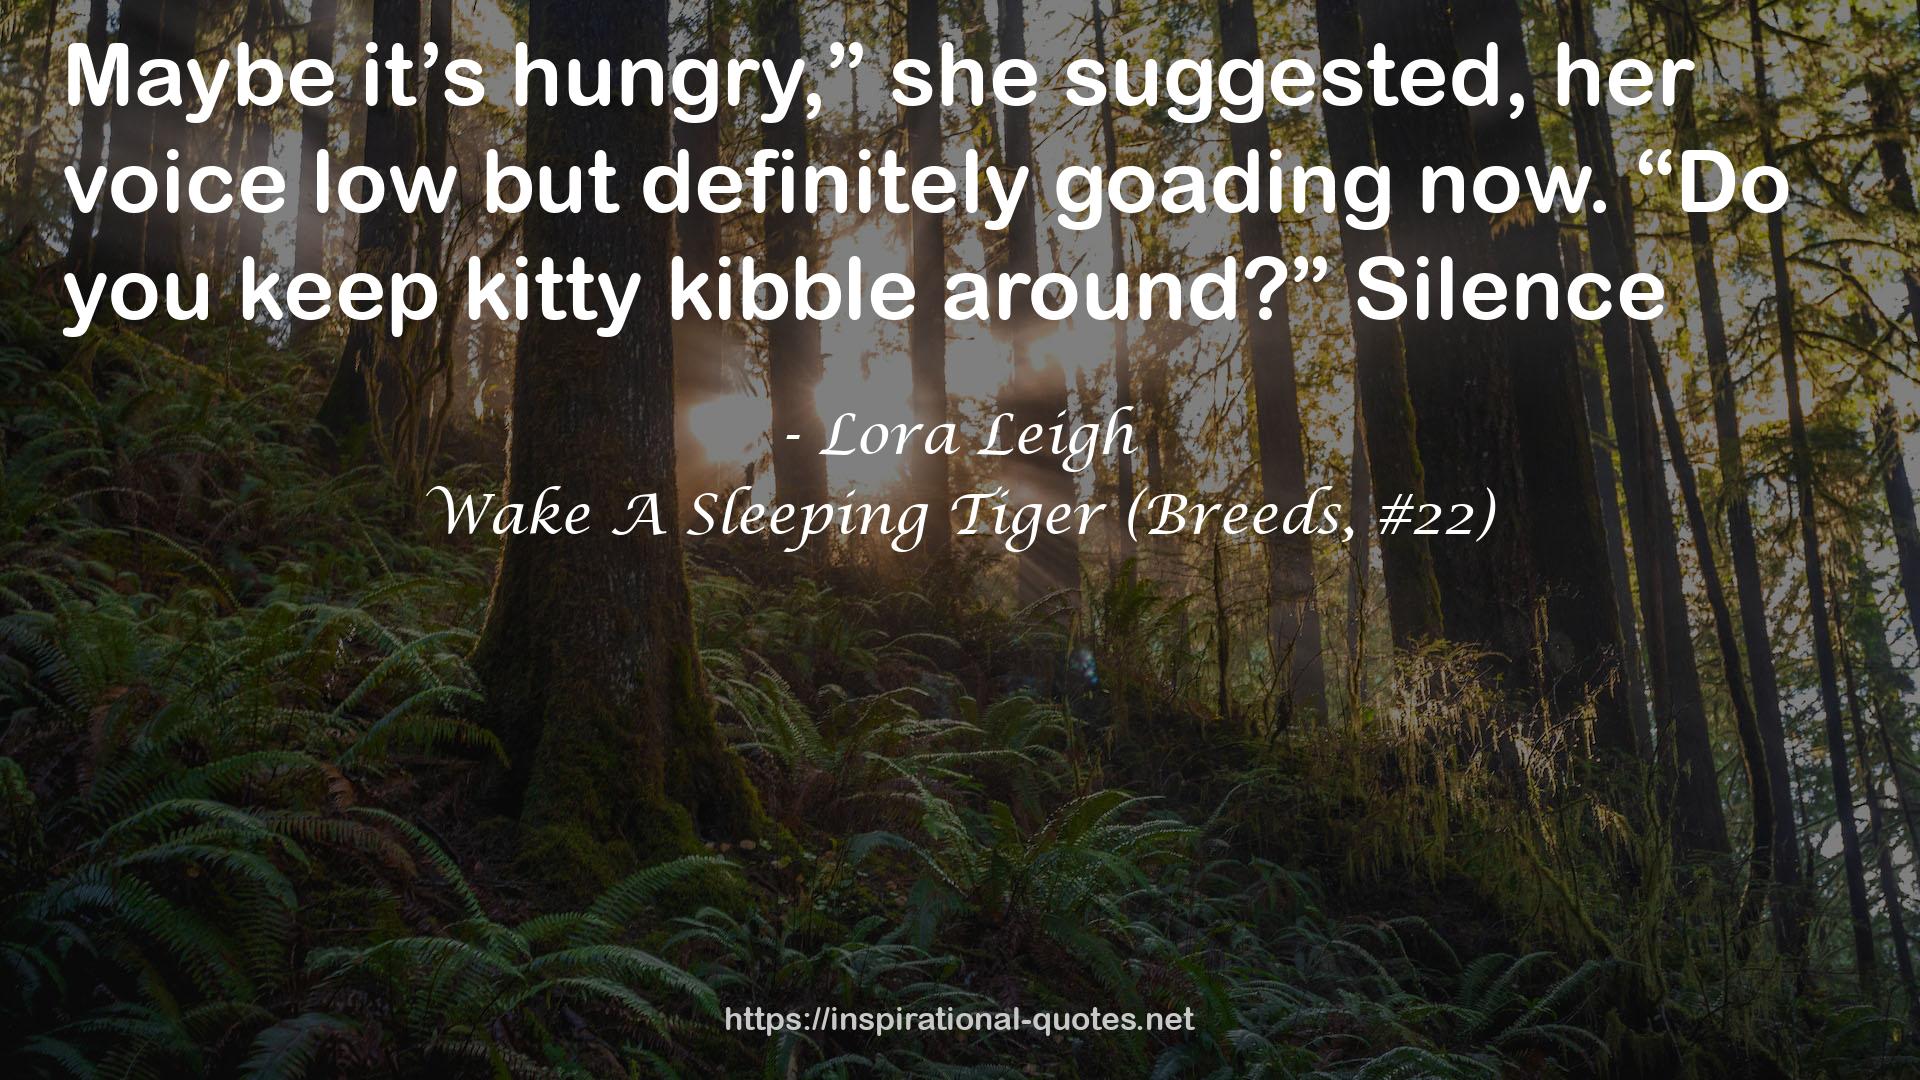 Wake A Sleeping Tiger (Breeds, #22) QUOTES